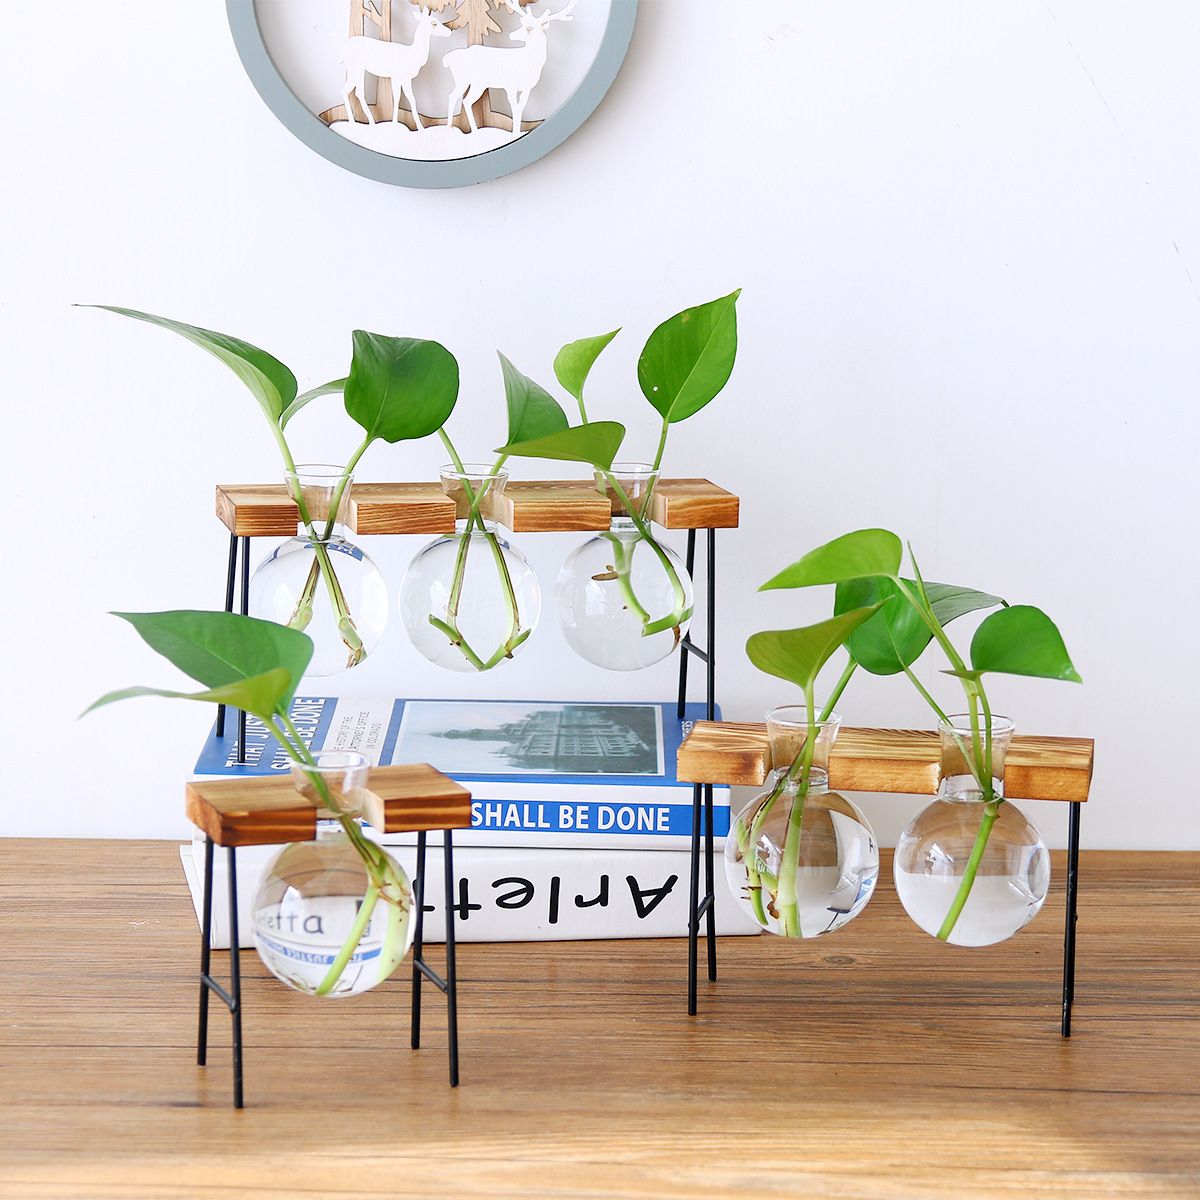 Ball-Shape-Glass-Vase-Plant-Hydroponic-Container-Flower-Bottle-Table-Desk-Decor-with-Wooden-Shelf-St-1478846